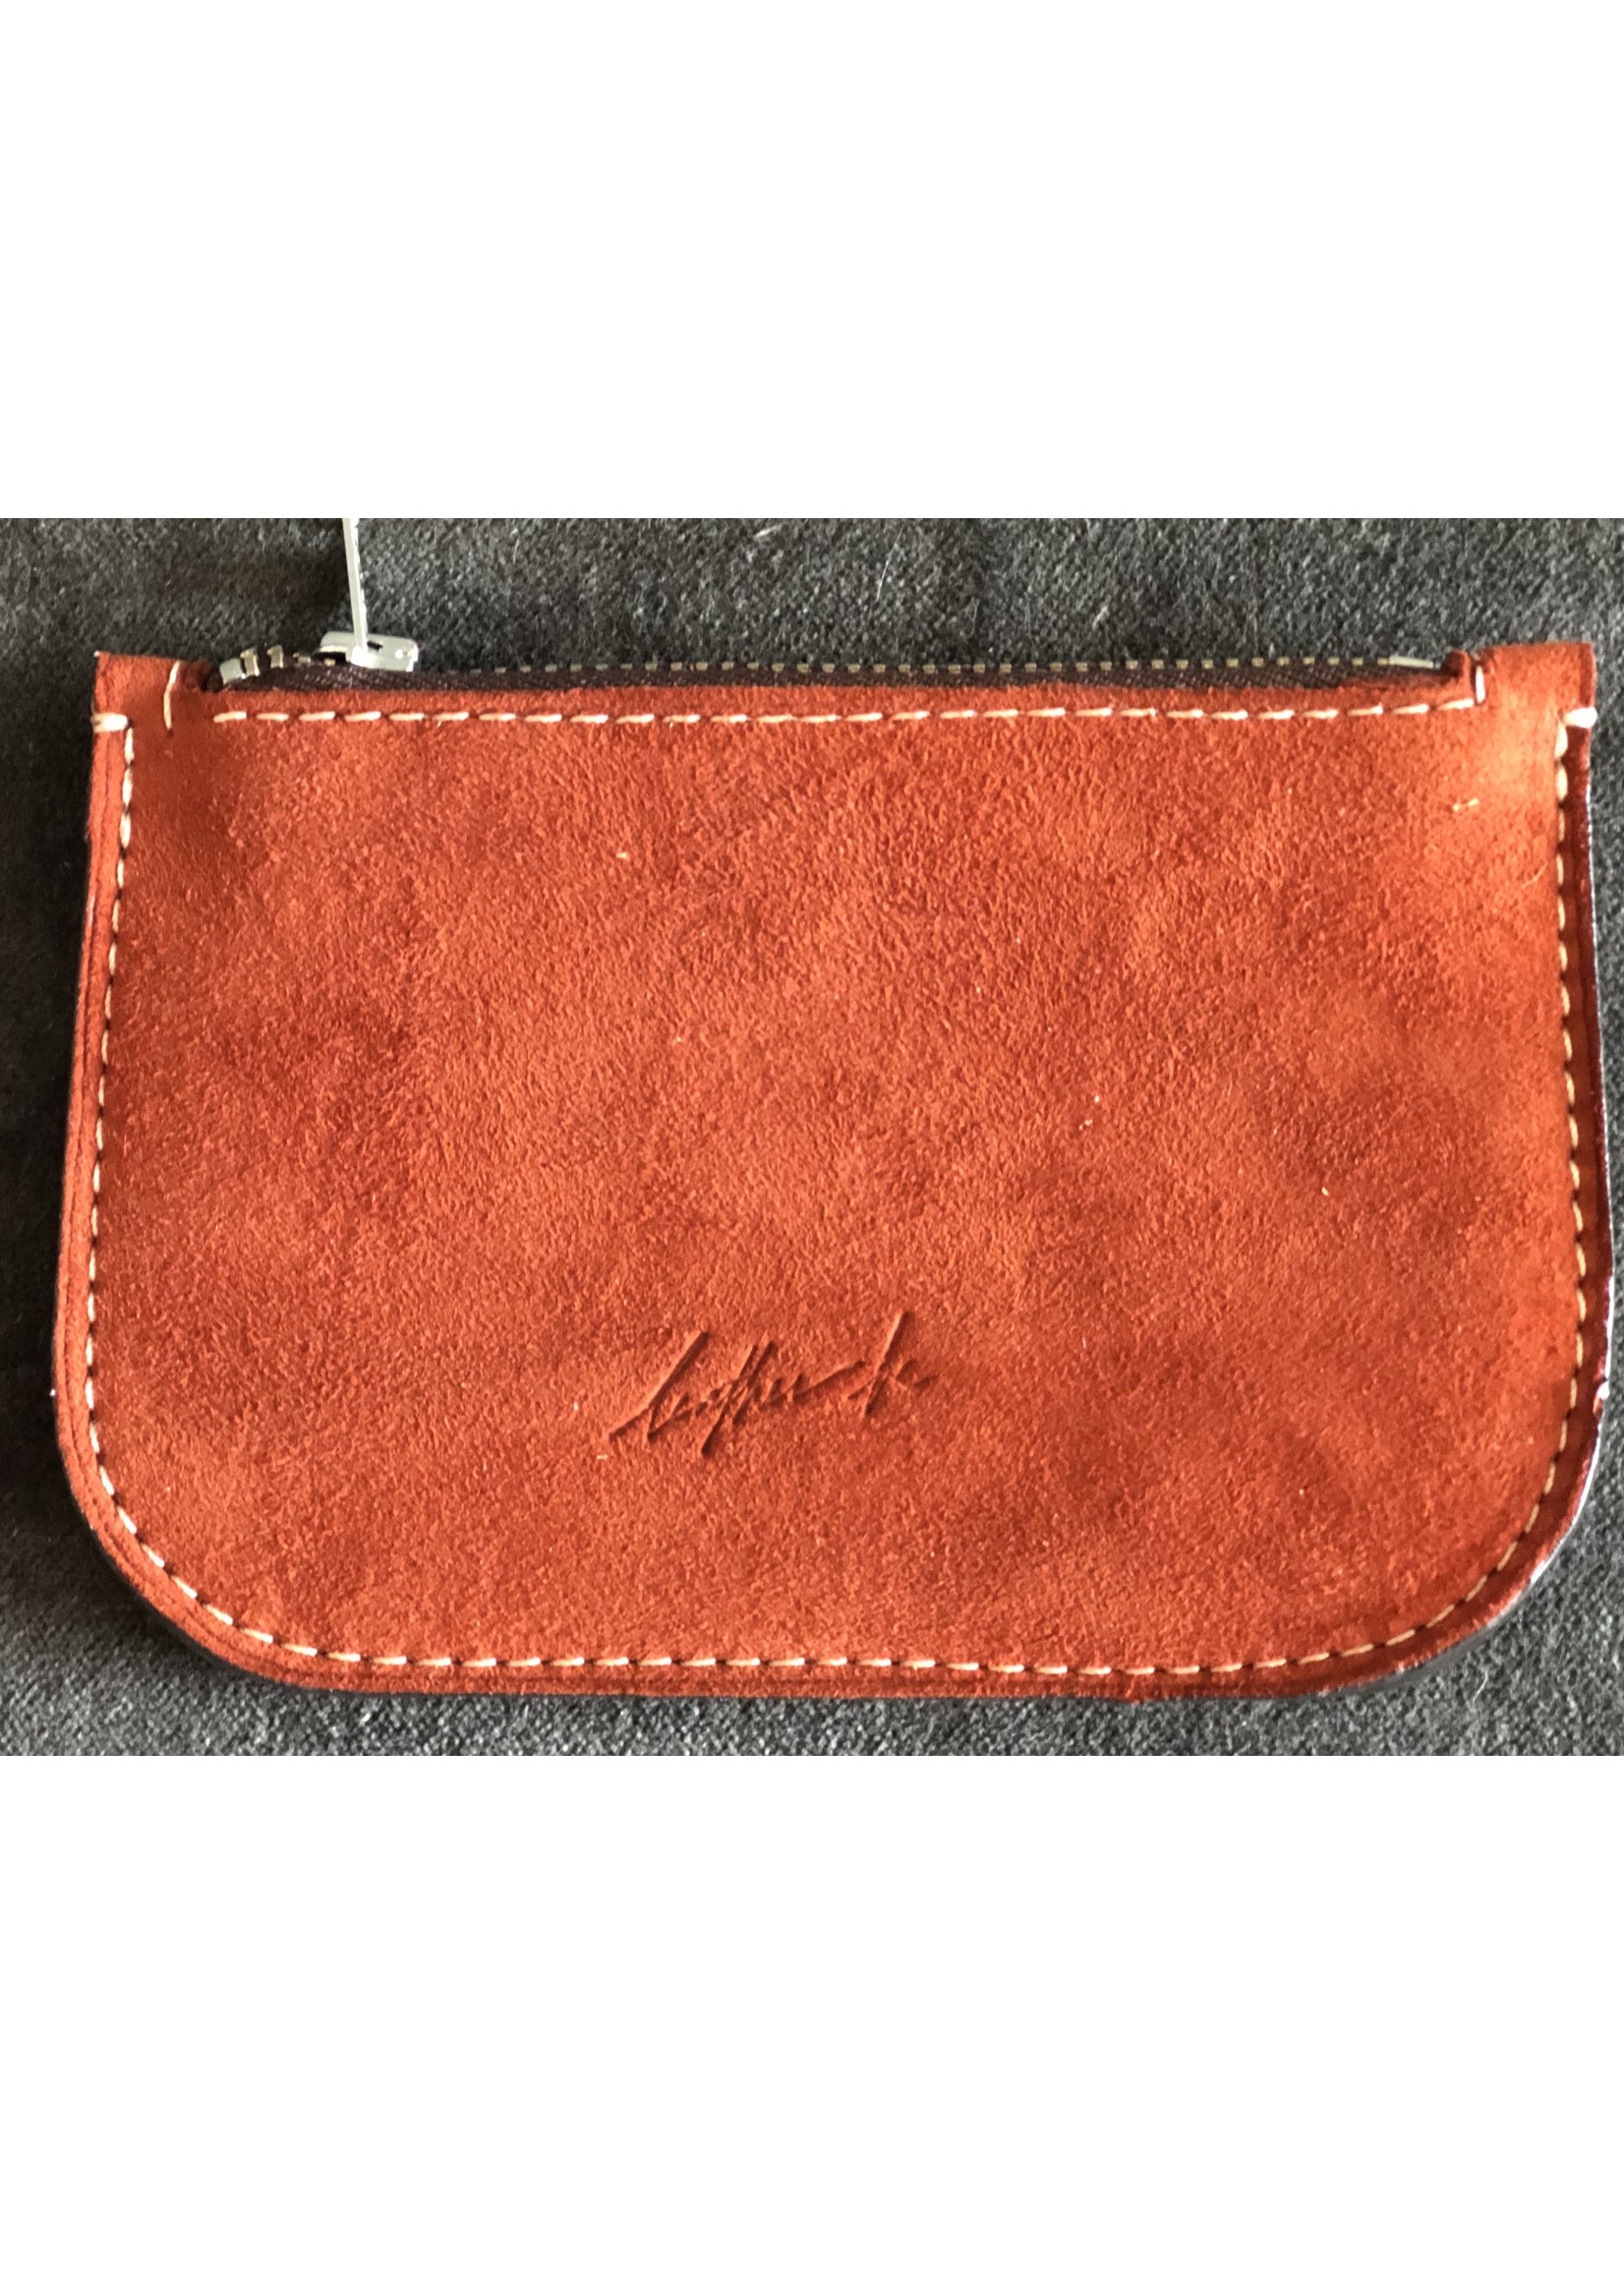 Leather Be Leather Be Coin Purse Zip